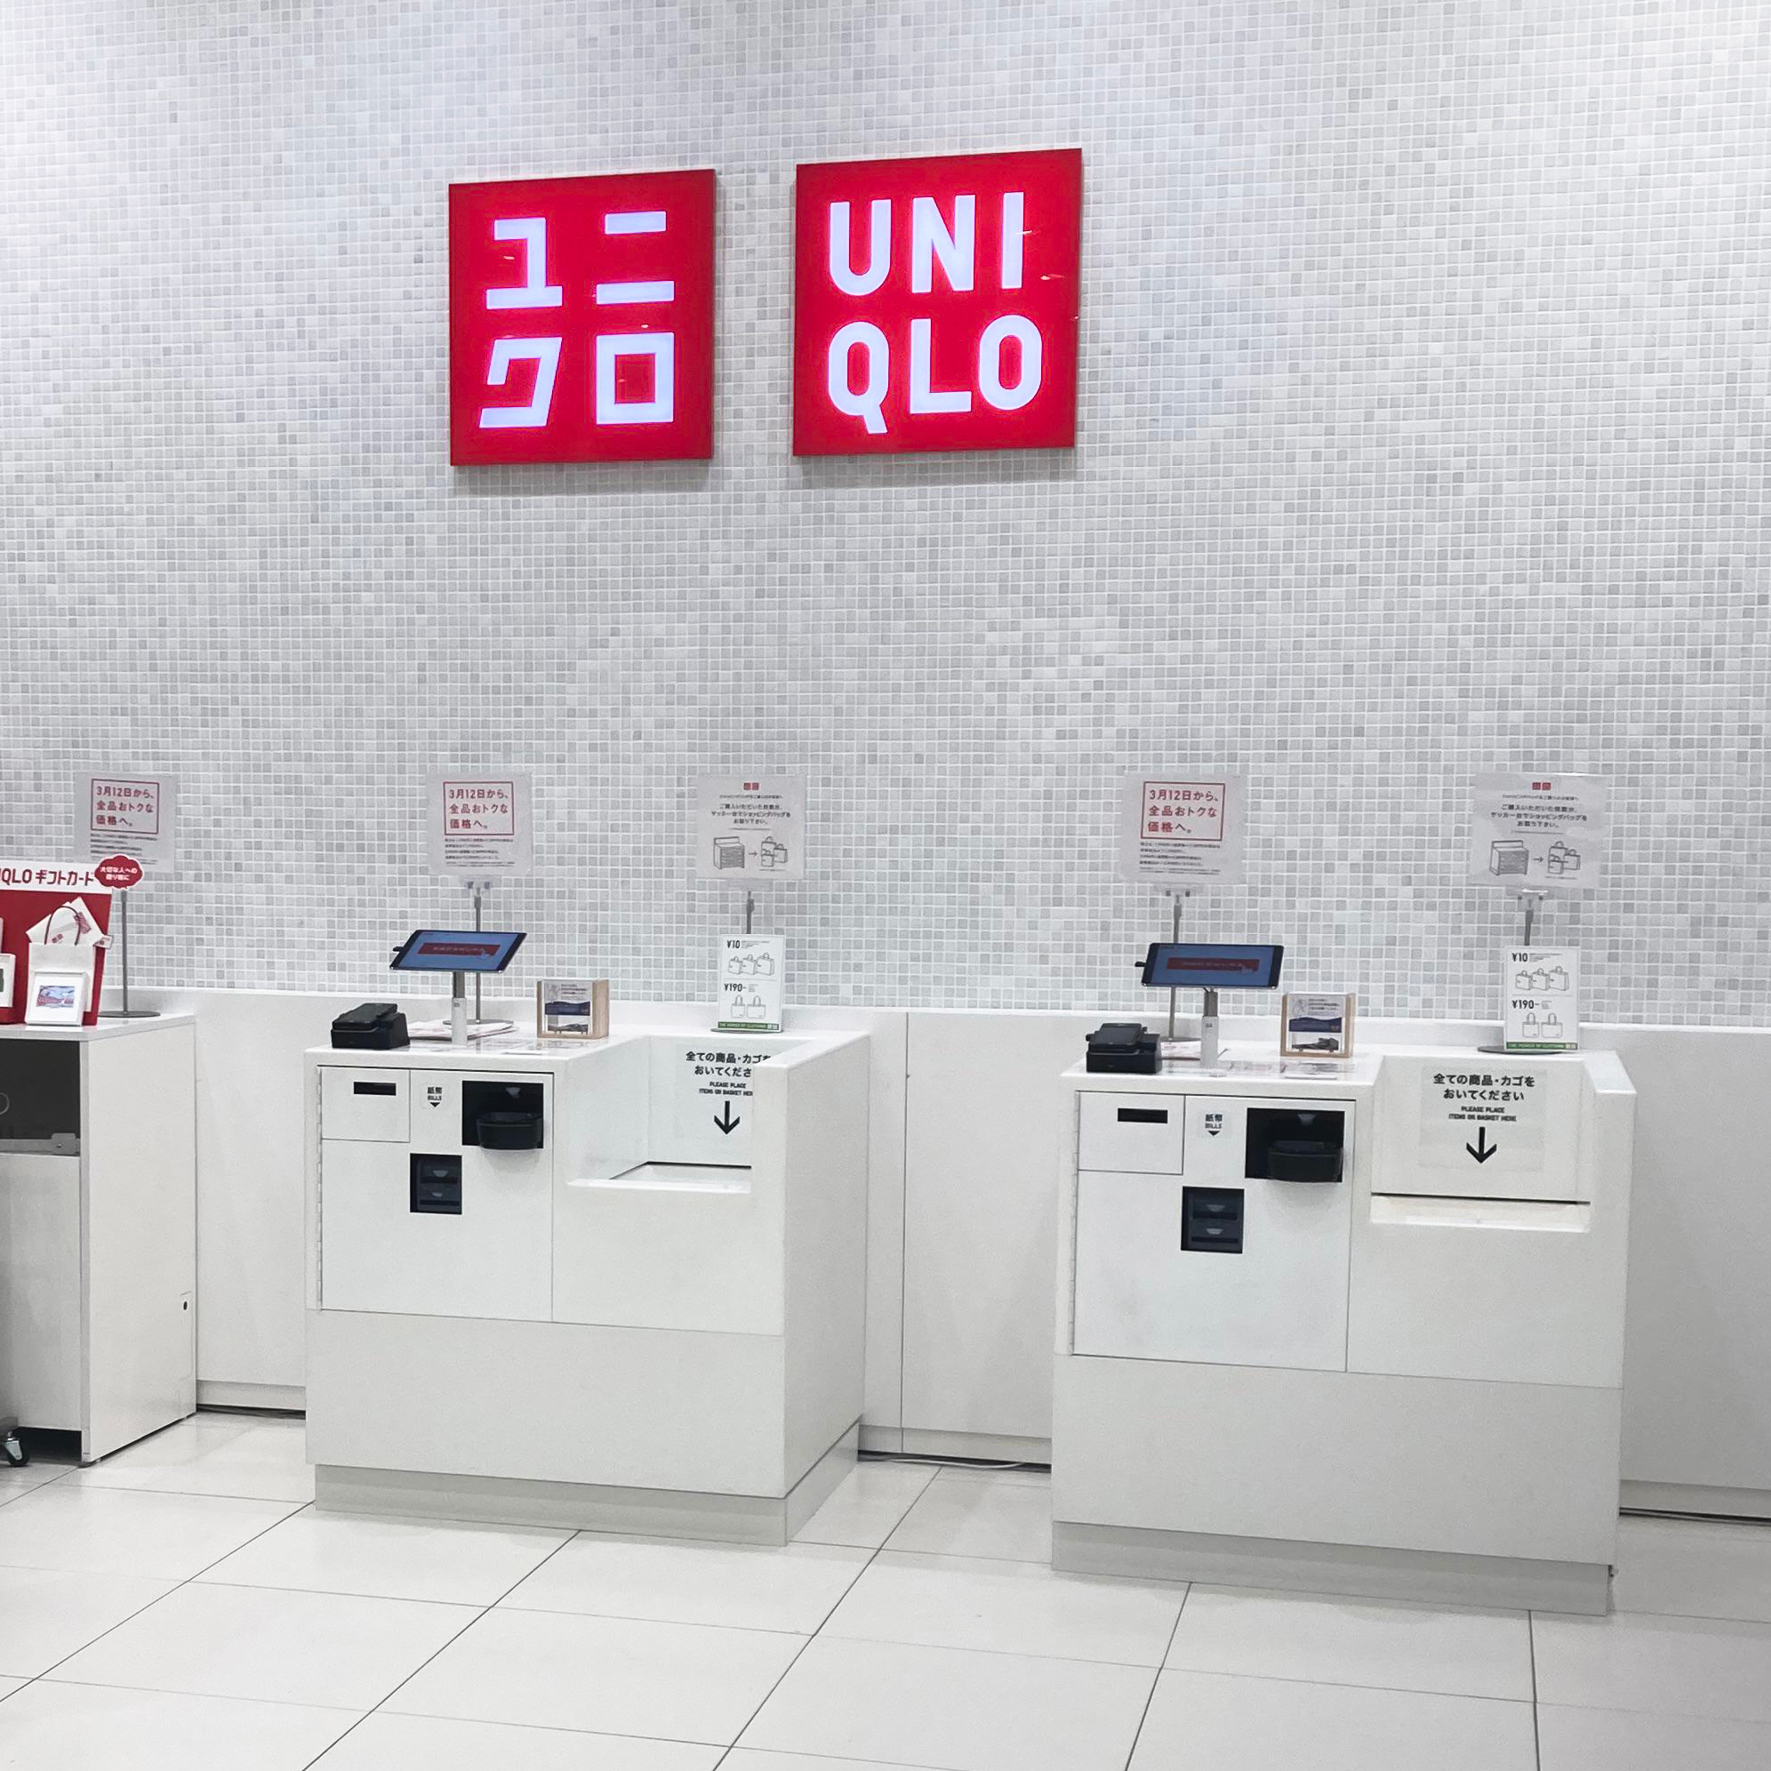 What is the magic that makes UNIQLO choose RFID?